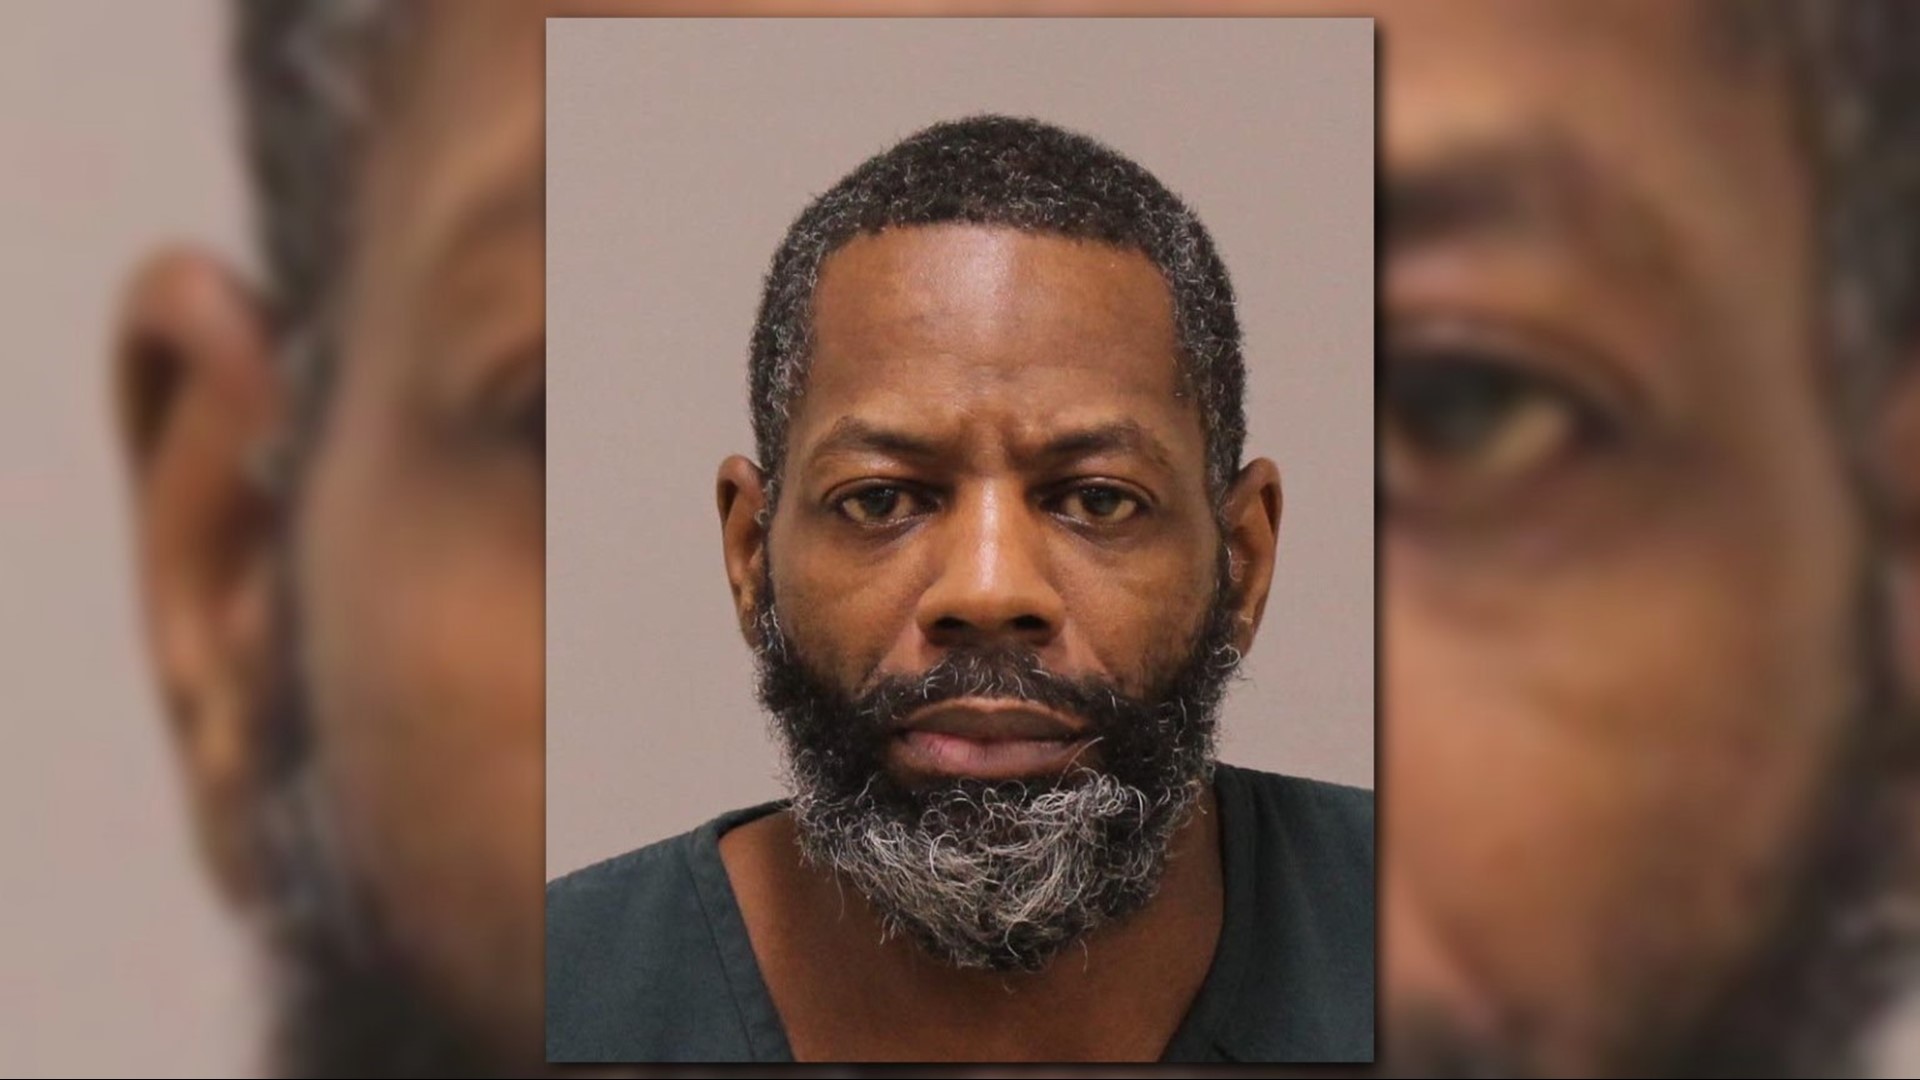 Louis Lee Pettway, 45, has felony convictions dating back to 1995. He is charged with open murder for a Dec. 22 shooting on Arnold Avenue SW.